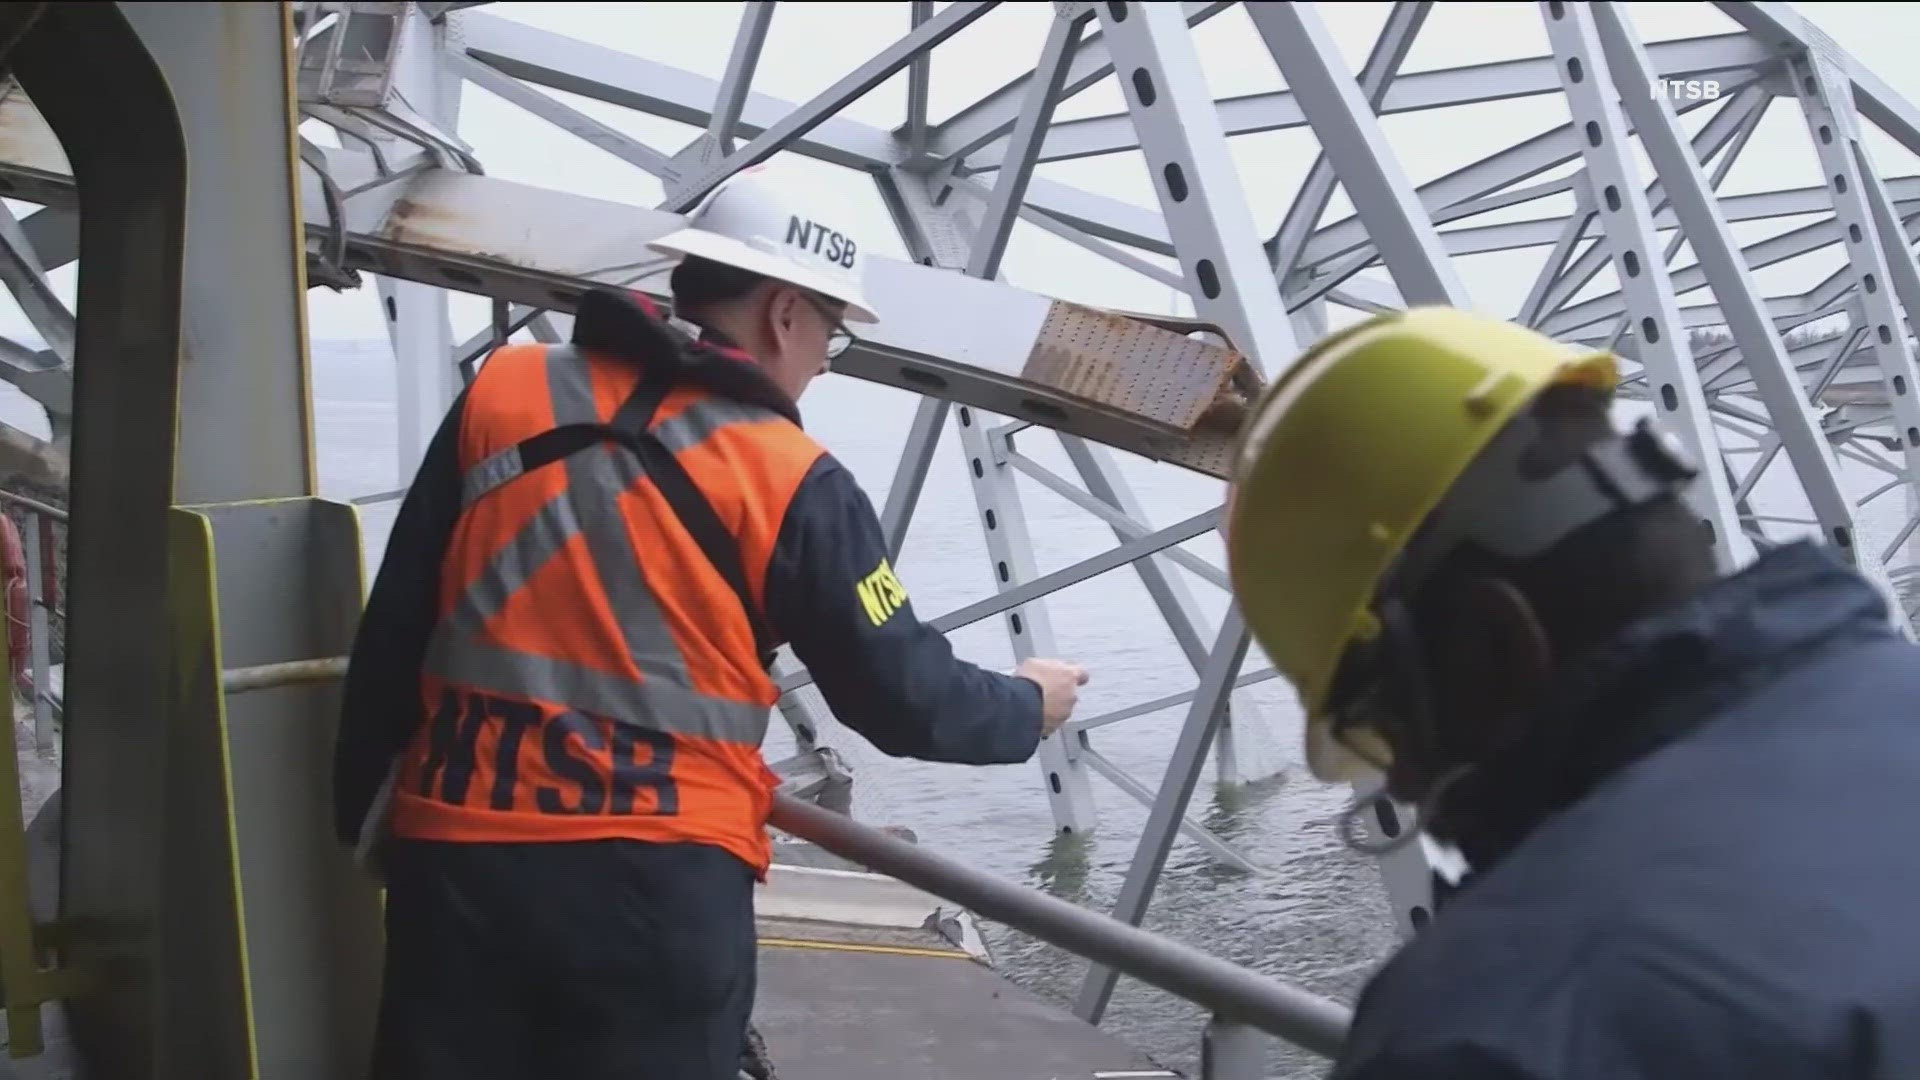 In the last few hours, new video from the NTSB shows investigators and engineers on board the ship that crashed into the Francis Scott Key bridge.